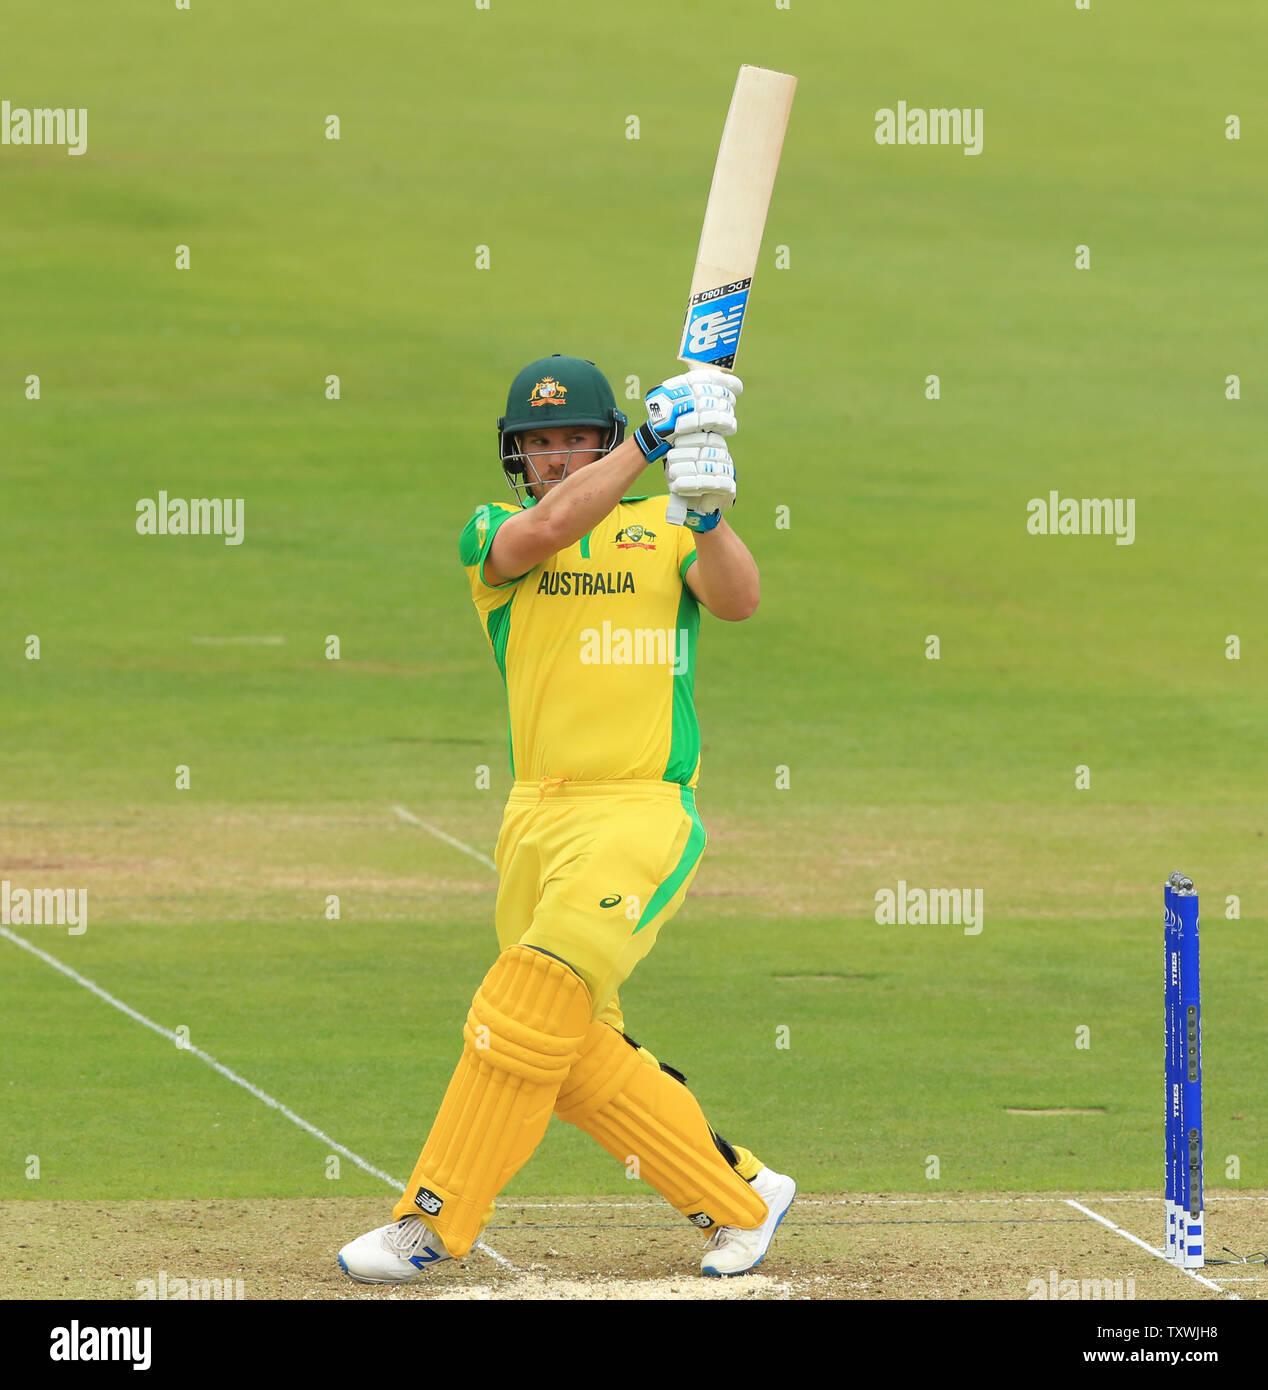 London, UK. 25th June 2019. Aaron Finch of Australia batting during the England v Australia, ICC Cricket World Cup match, at Lords, London, England. Credit: European Sports Photographic Agency/Alamy Live News Stock Photo